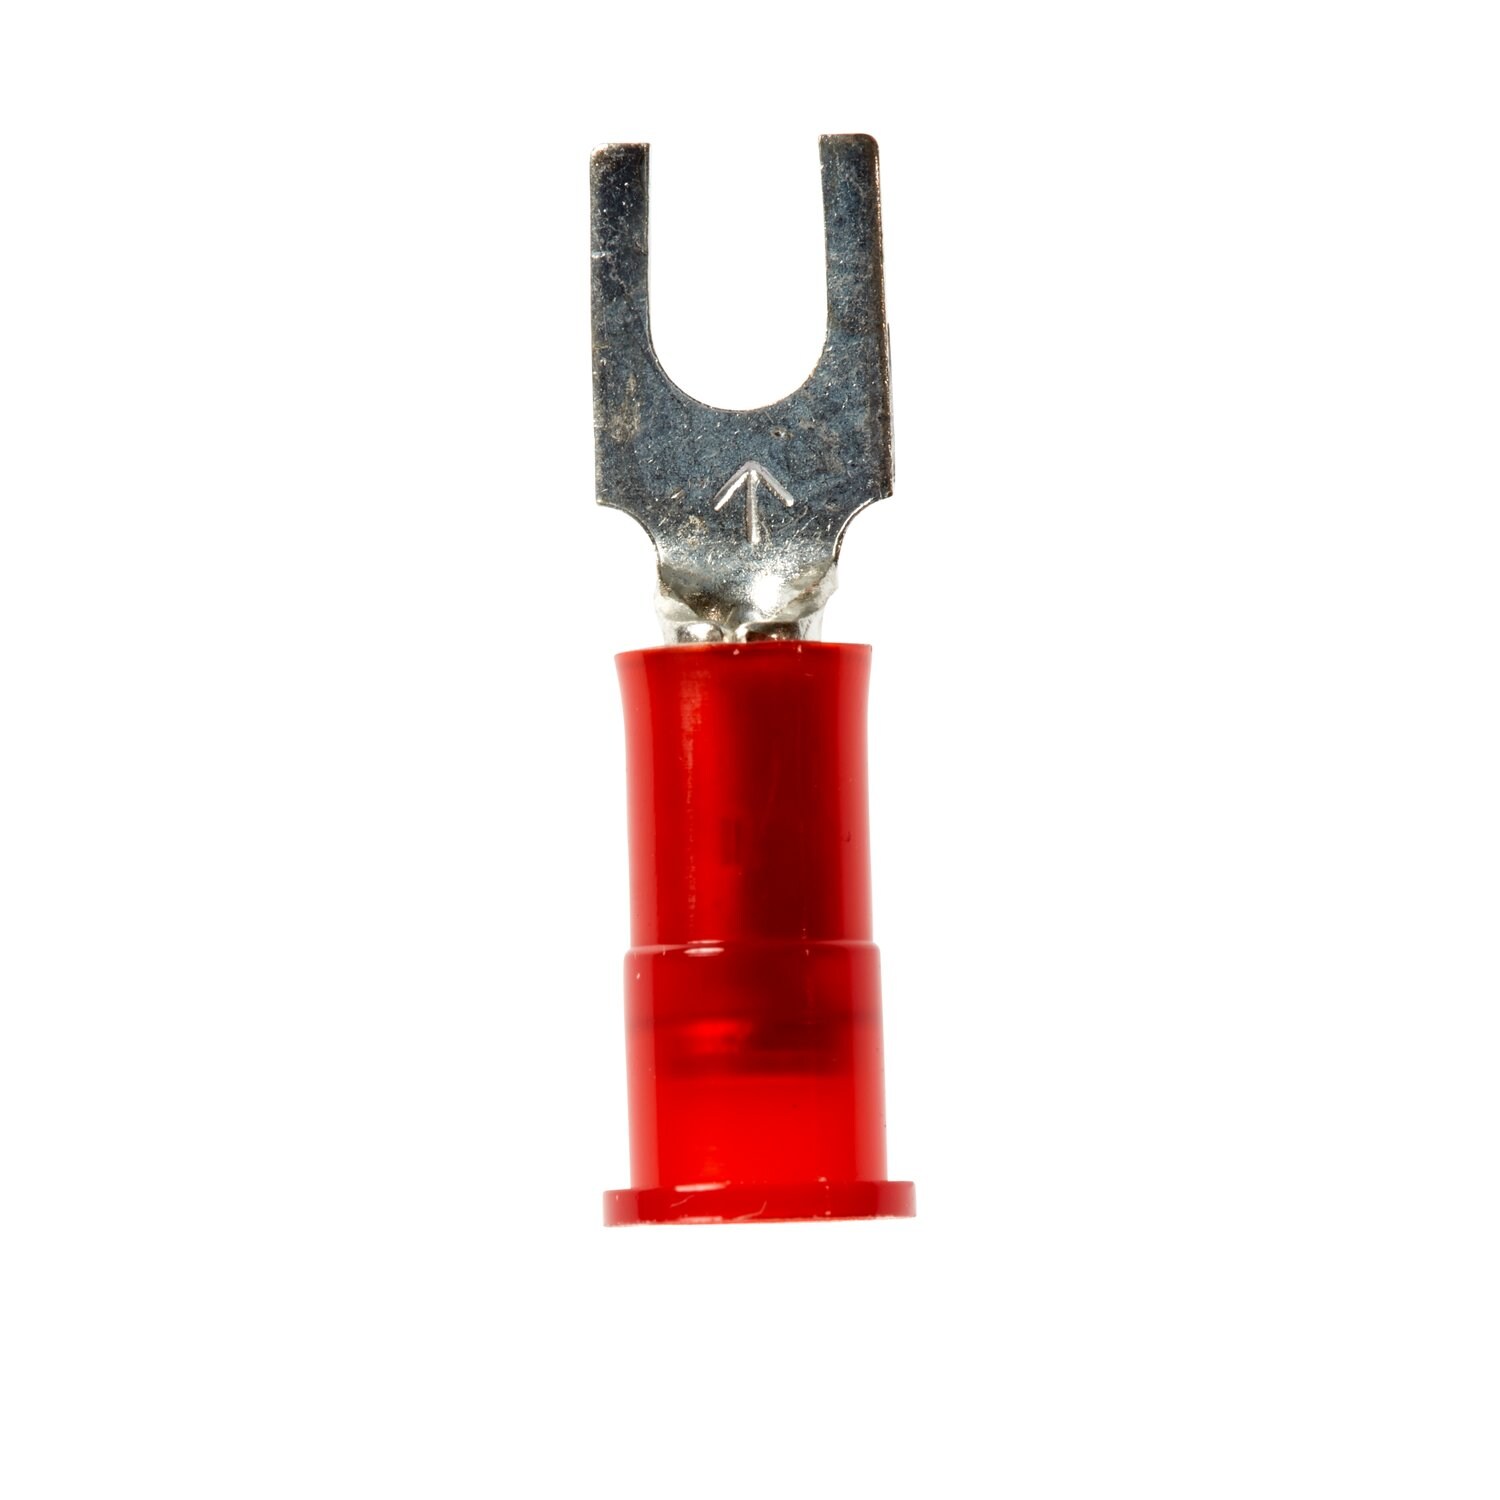 7000133409 - 3M Scotchlok Block Fork Nylon Insulated, 100/bottle, MNG18-6FB/SX,
suitable for use in a terminal block, 500/Case